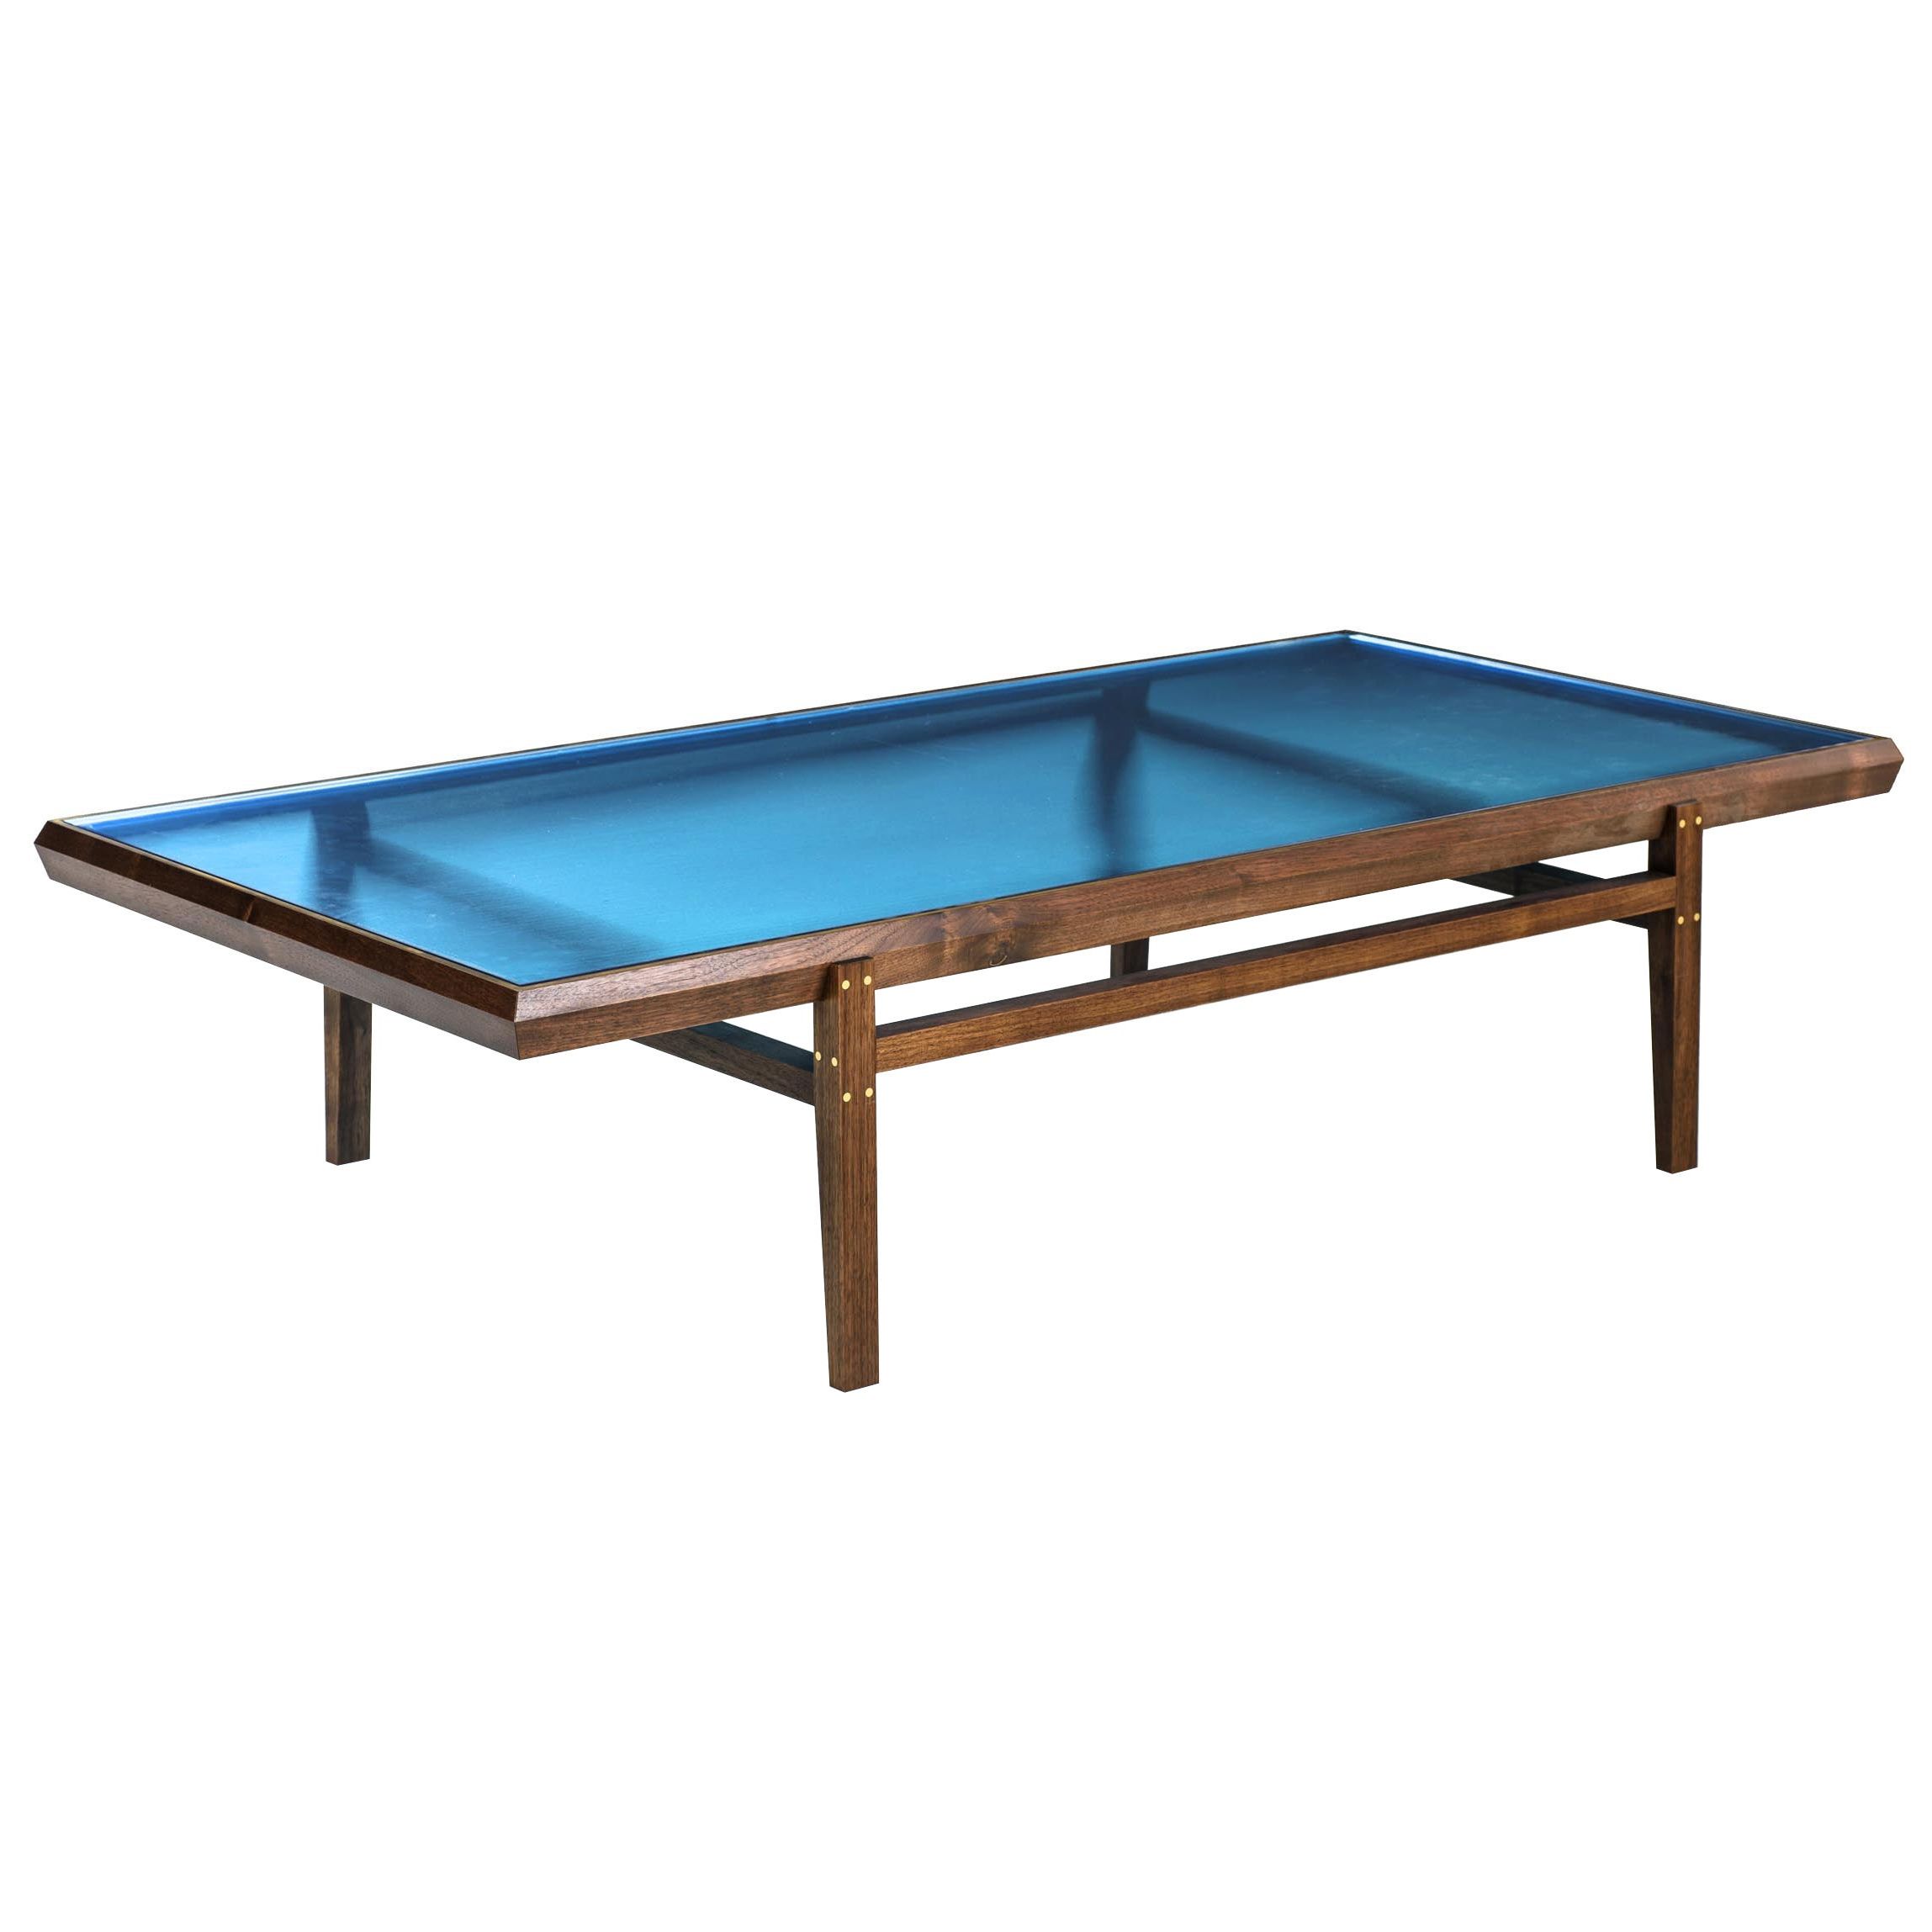 Contemporary Gold Leaf Inlay Coffee Table With Brass Frame Within Well Known Antique Blue Gold Coffee Tables (View 11 of 20)